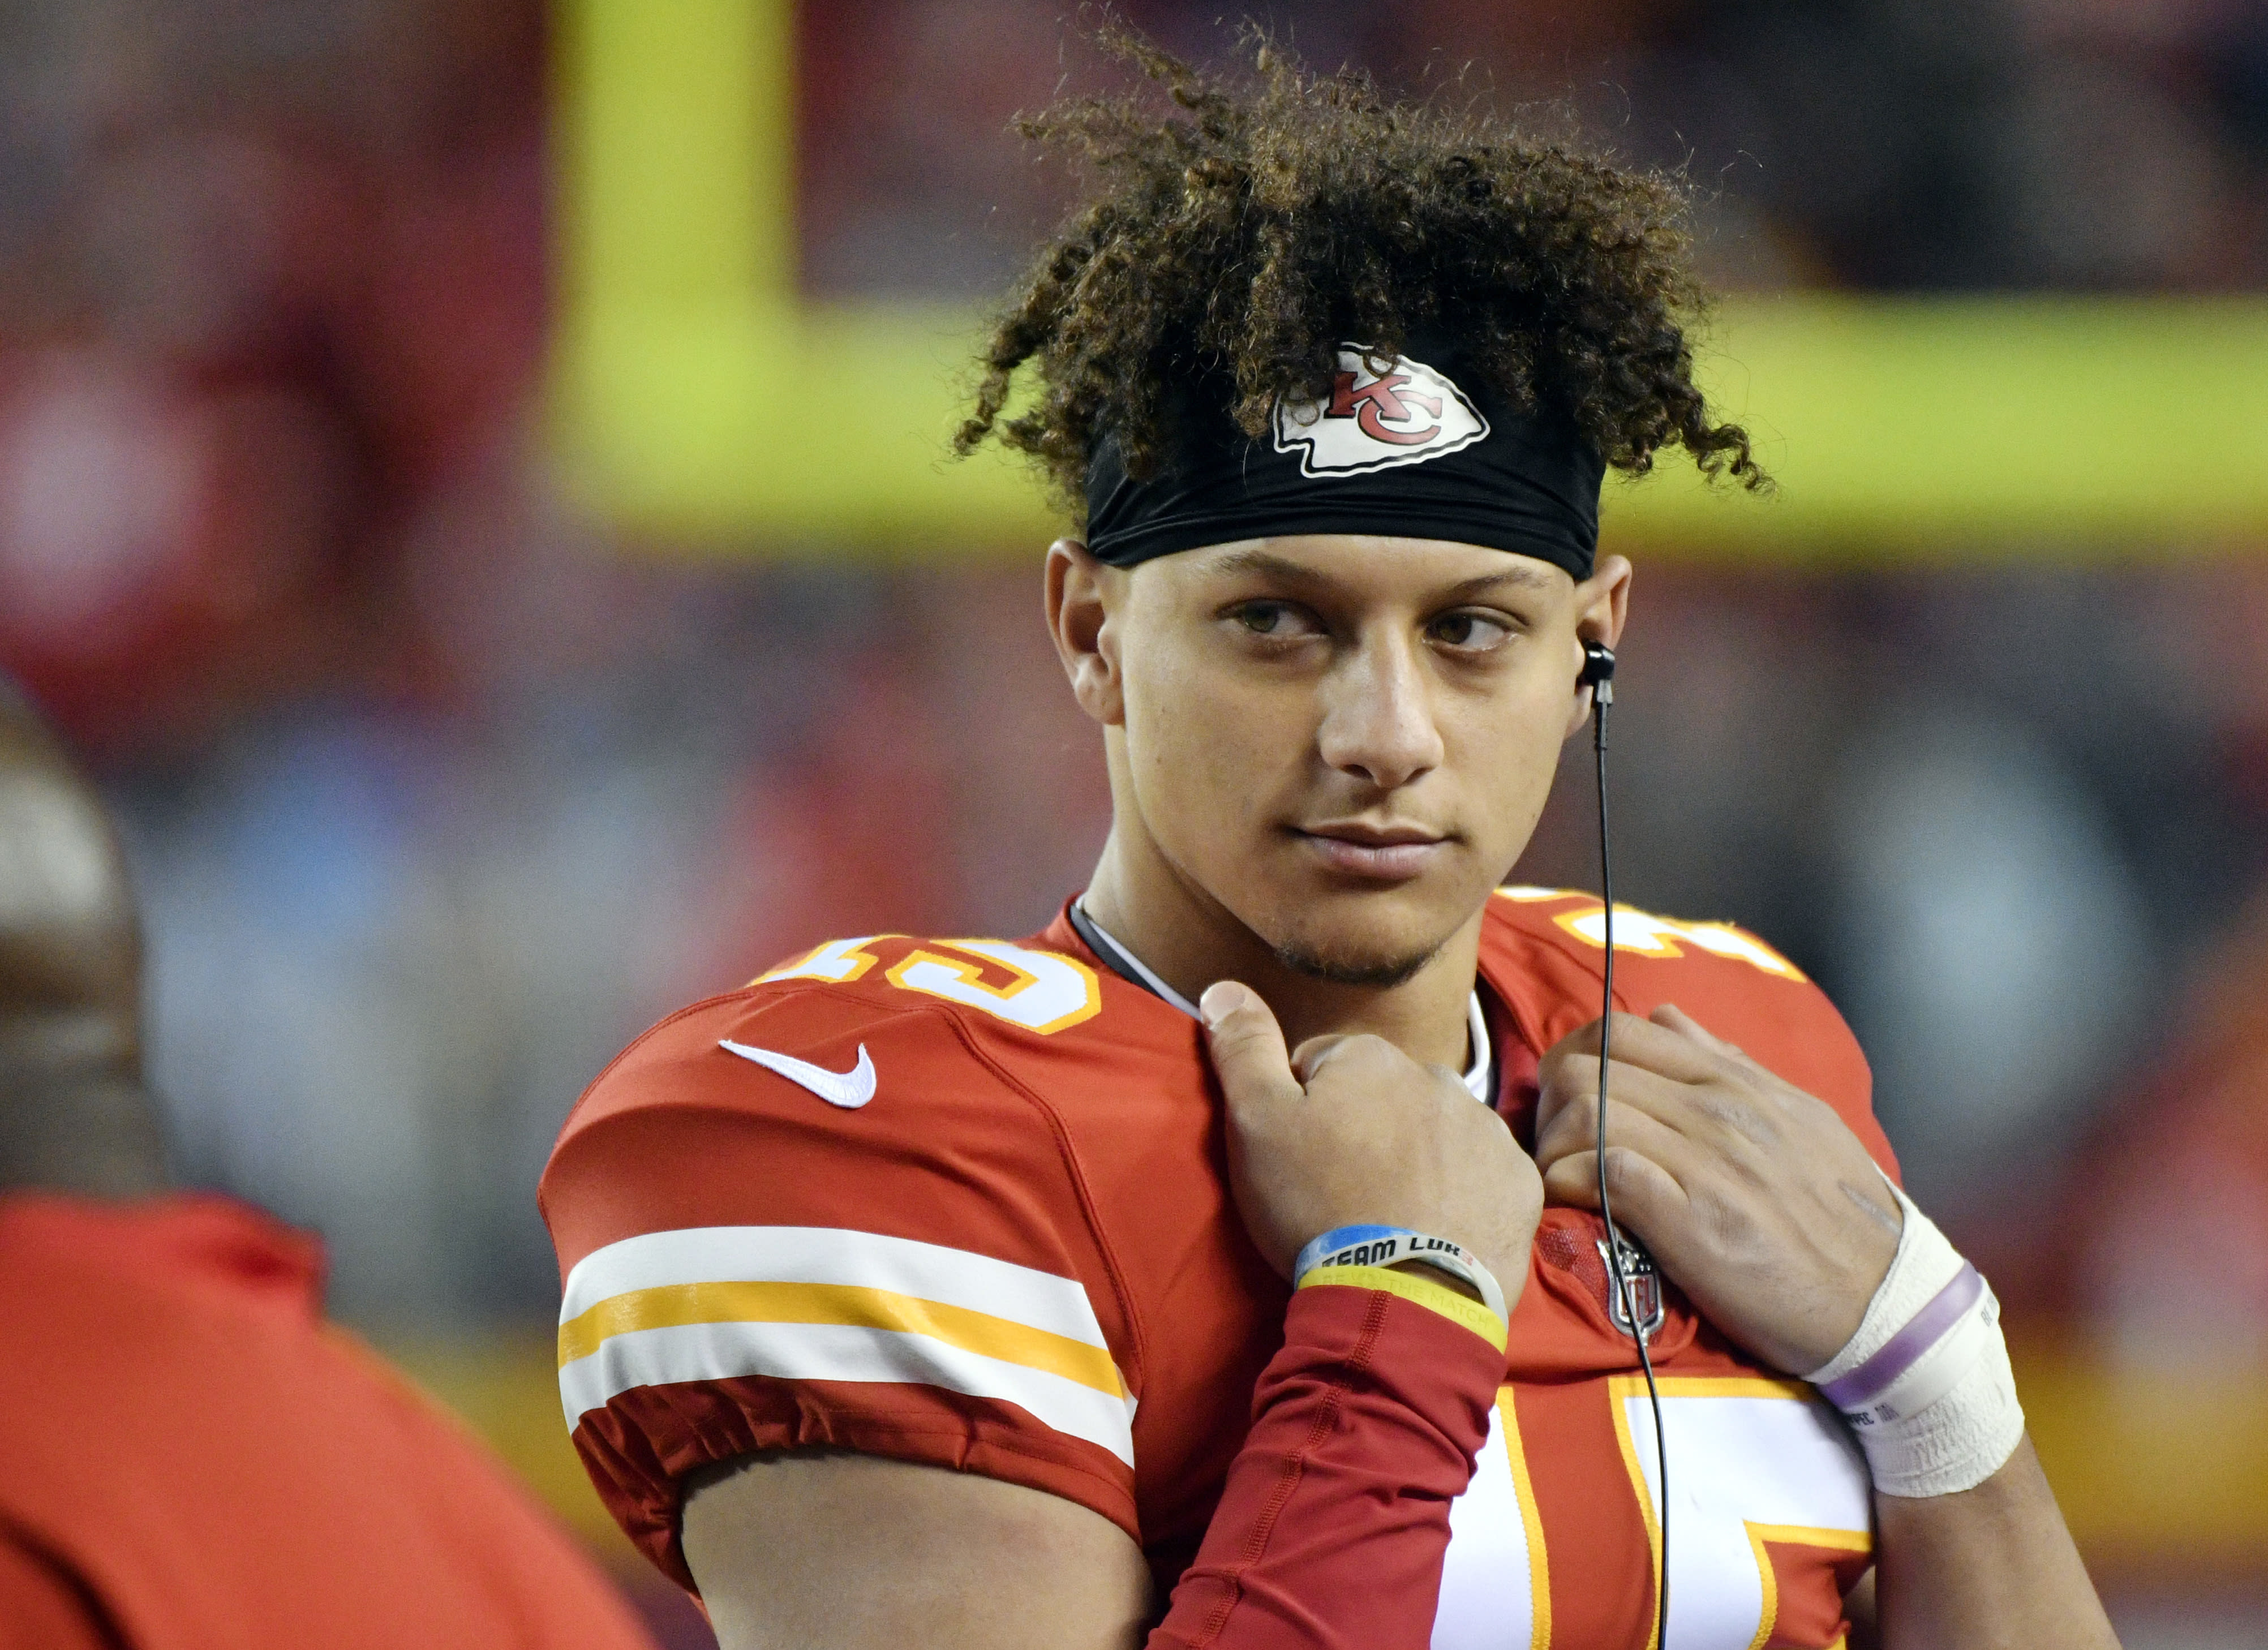 Patrick Mahomes lost a game of 'Fortnite' to someone playing as P...